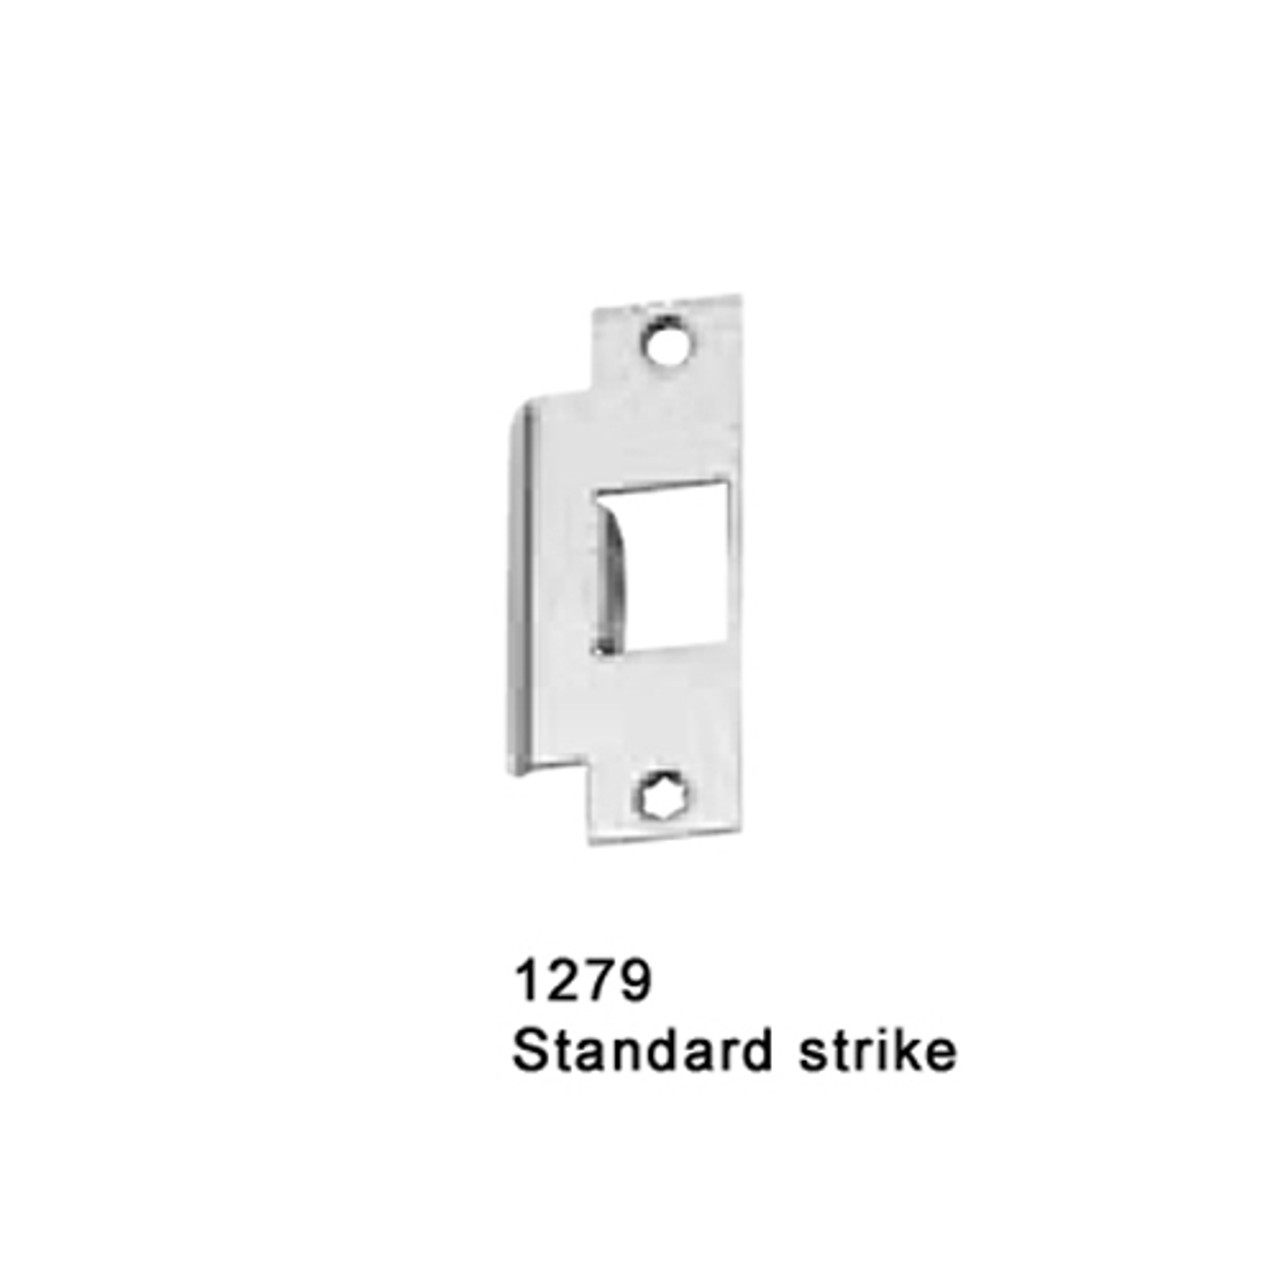 CD25-M-NL-OP-US26D-3-LHR Falcon 25 Series Night Latch Optional Pull Mortise Lock Devices with Less Trim in Satin Chrome